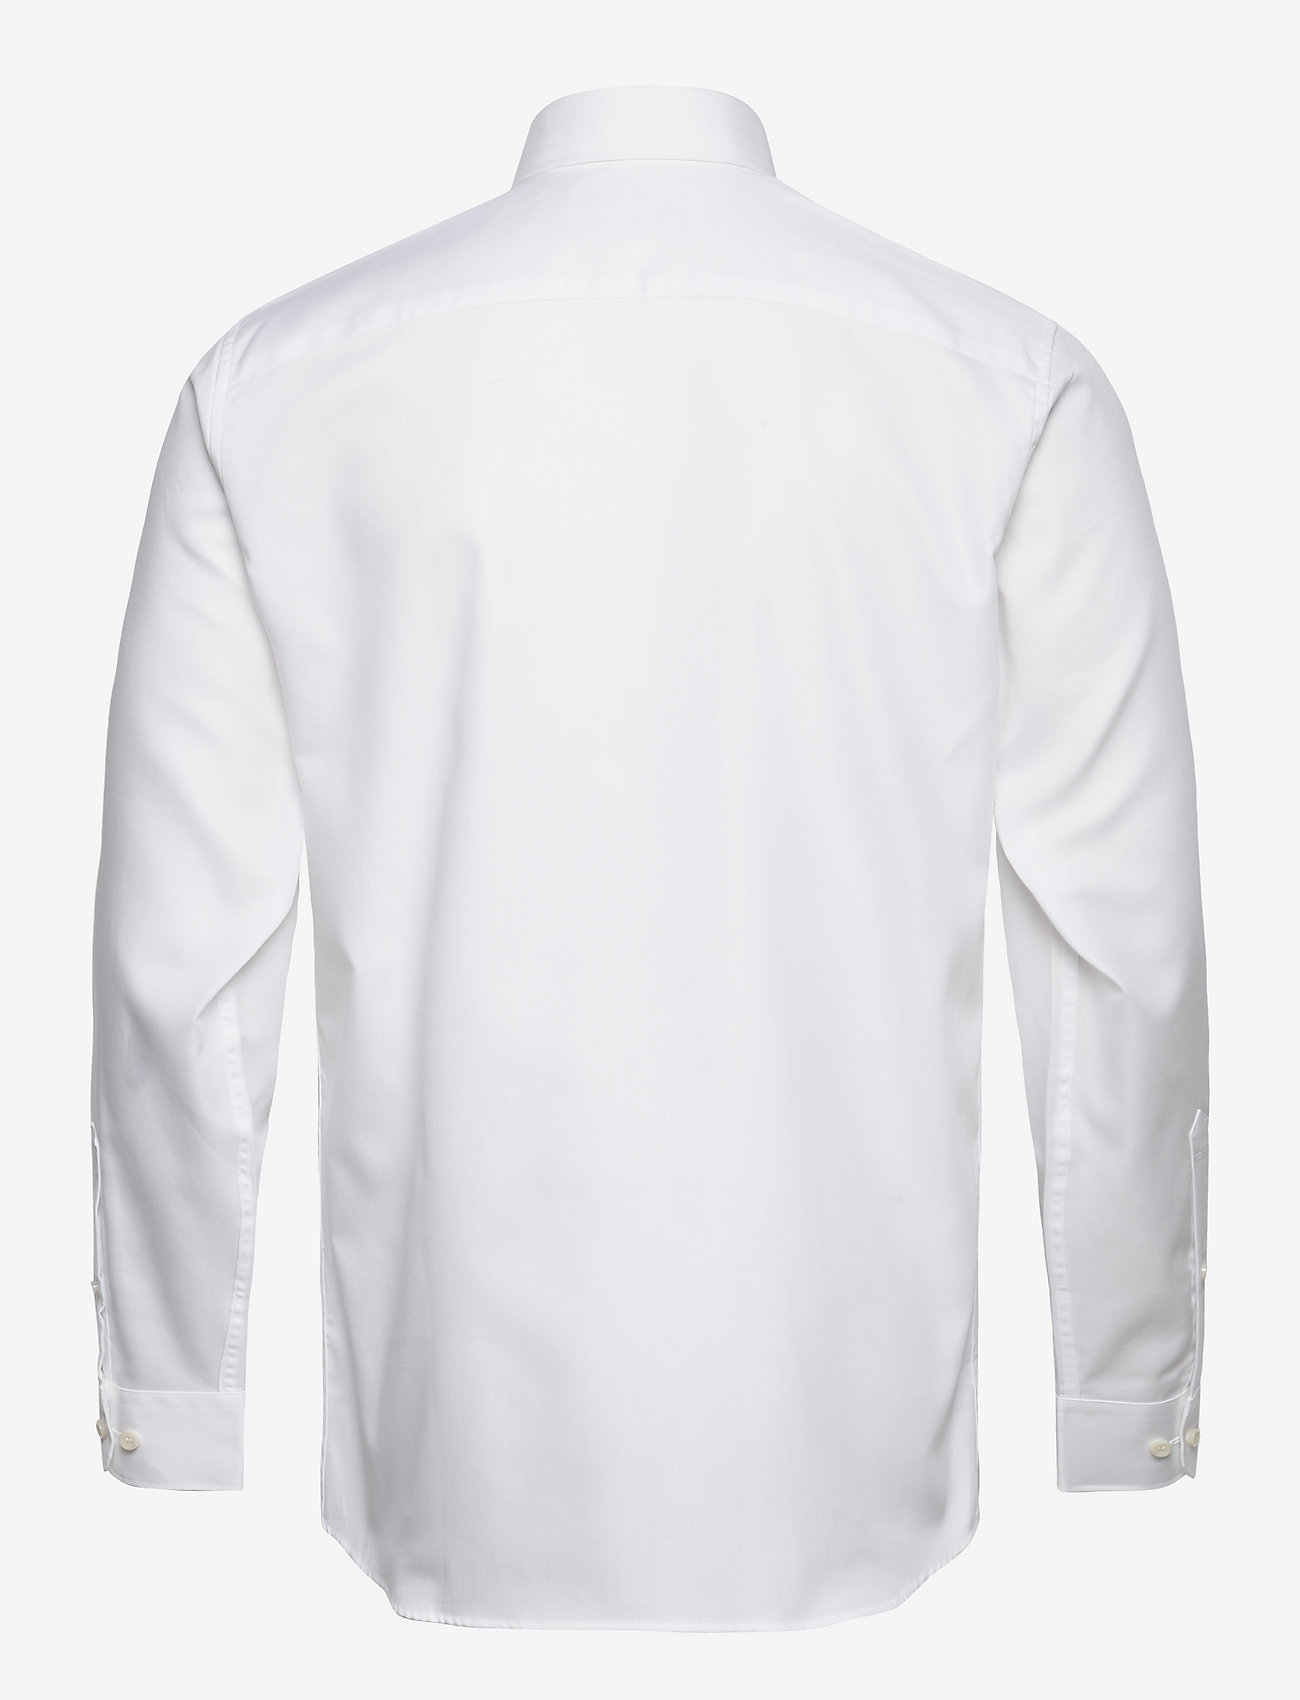 Selected Homme - SLHSLIMETHAN SHIRT LS CLASSIC NOOS - basic shirts - bright white - 1